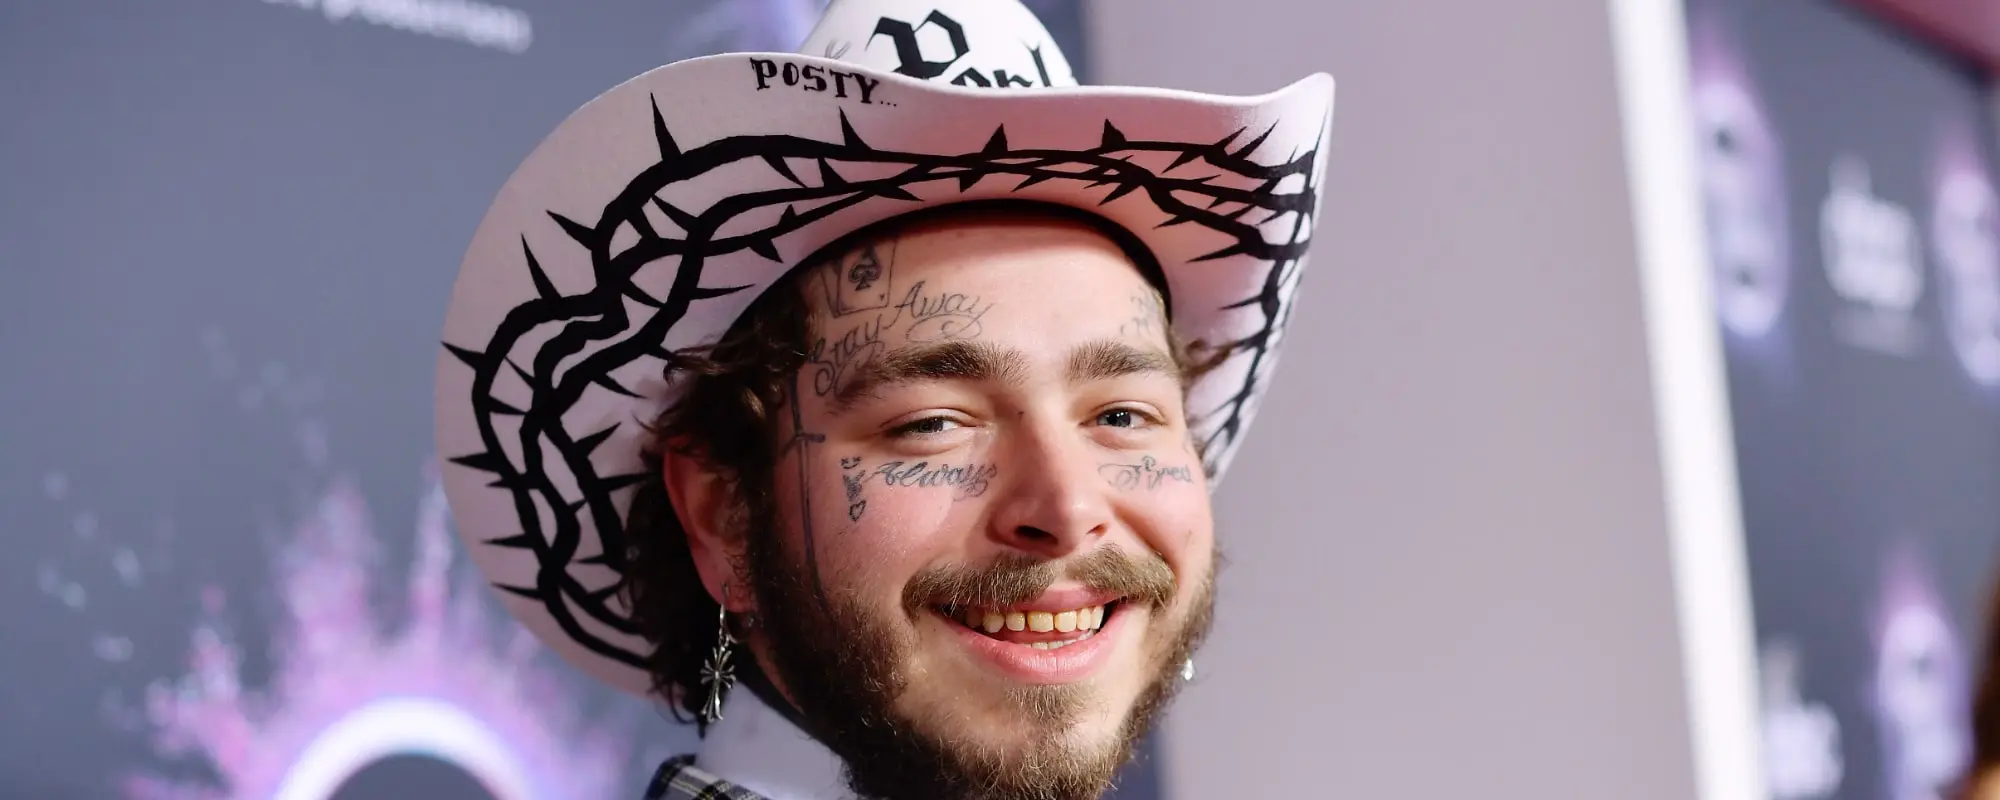 Post Malone Teases Unreleased Country Song “Missin’ You Like This” and Leaves Fans Wanting More